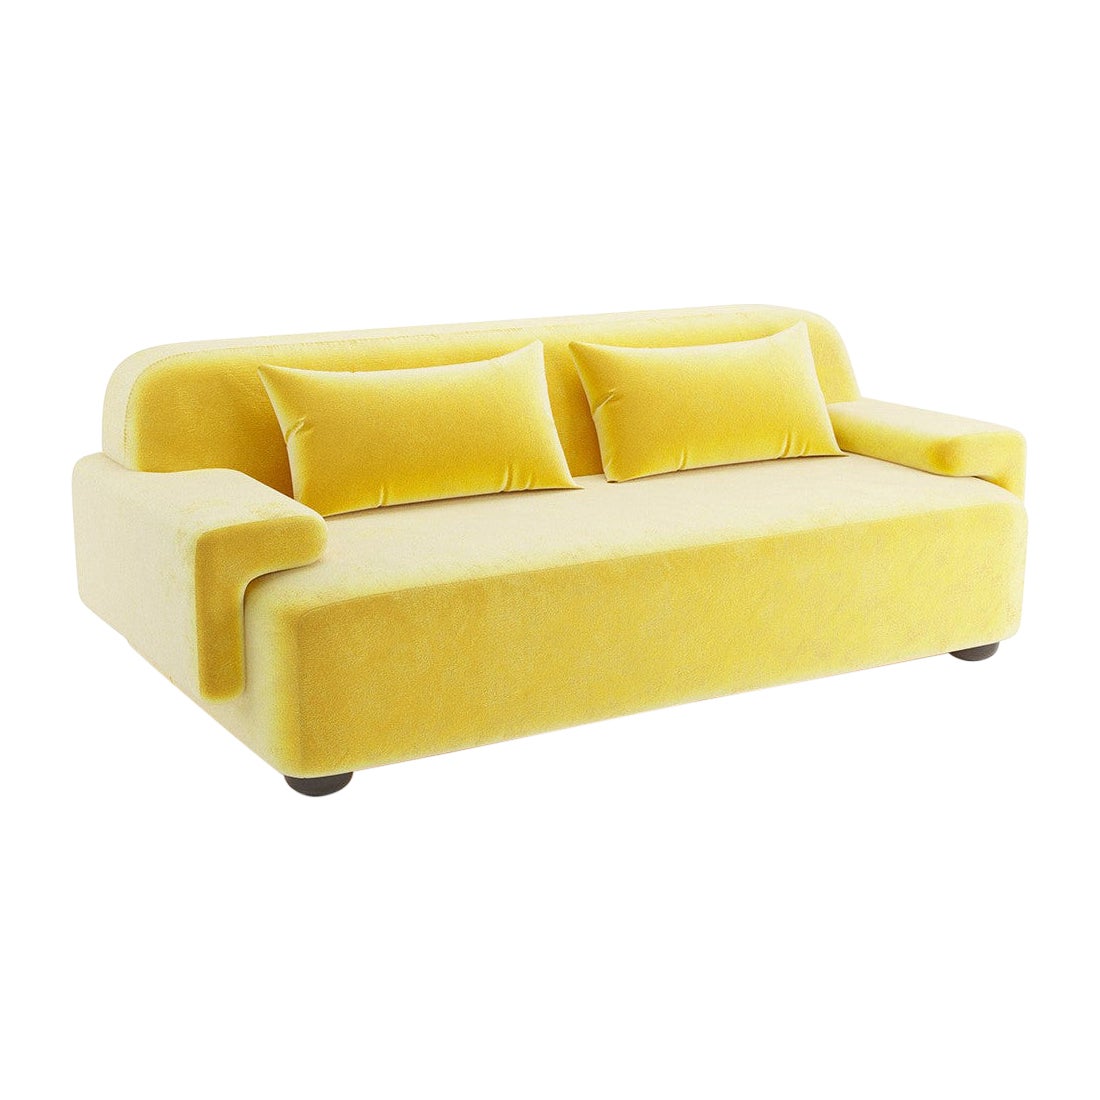 Popus Editions Lena 3 Seater Sofa in Yellow Como Velvet Upholstery For Sale